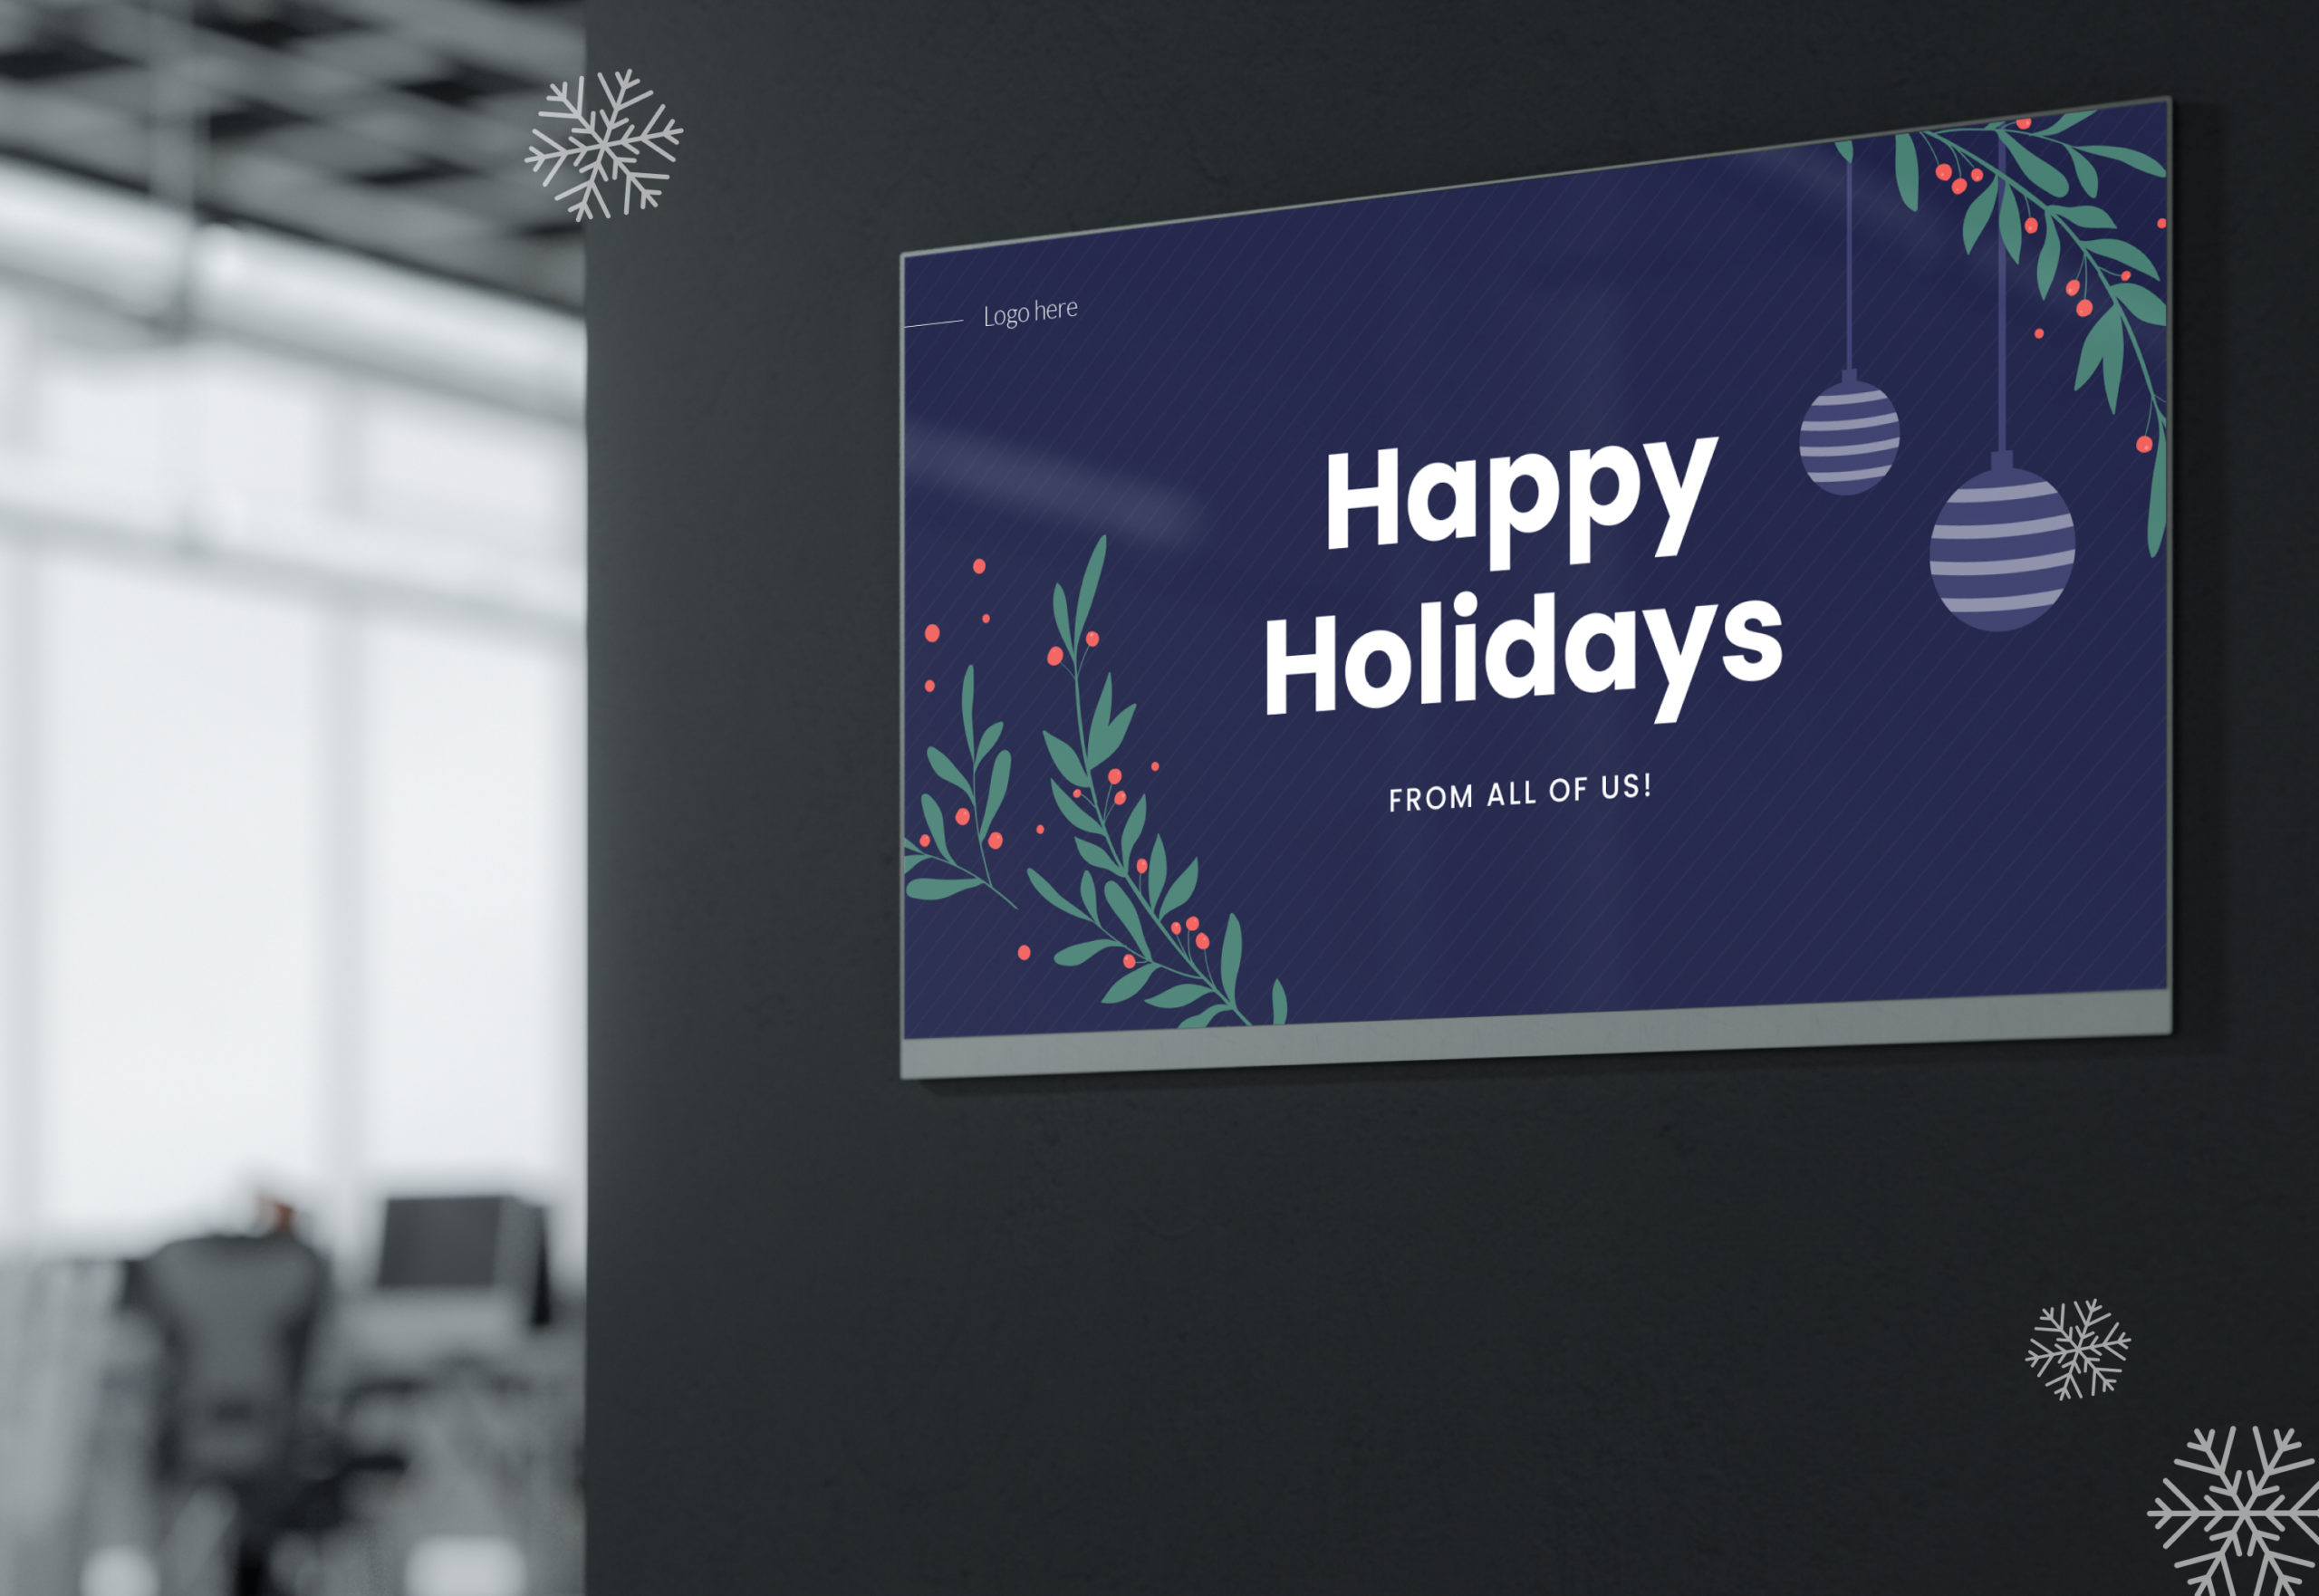 How To Design Heavenly Holiday Digital Signage Content + [Free Templates]